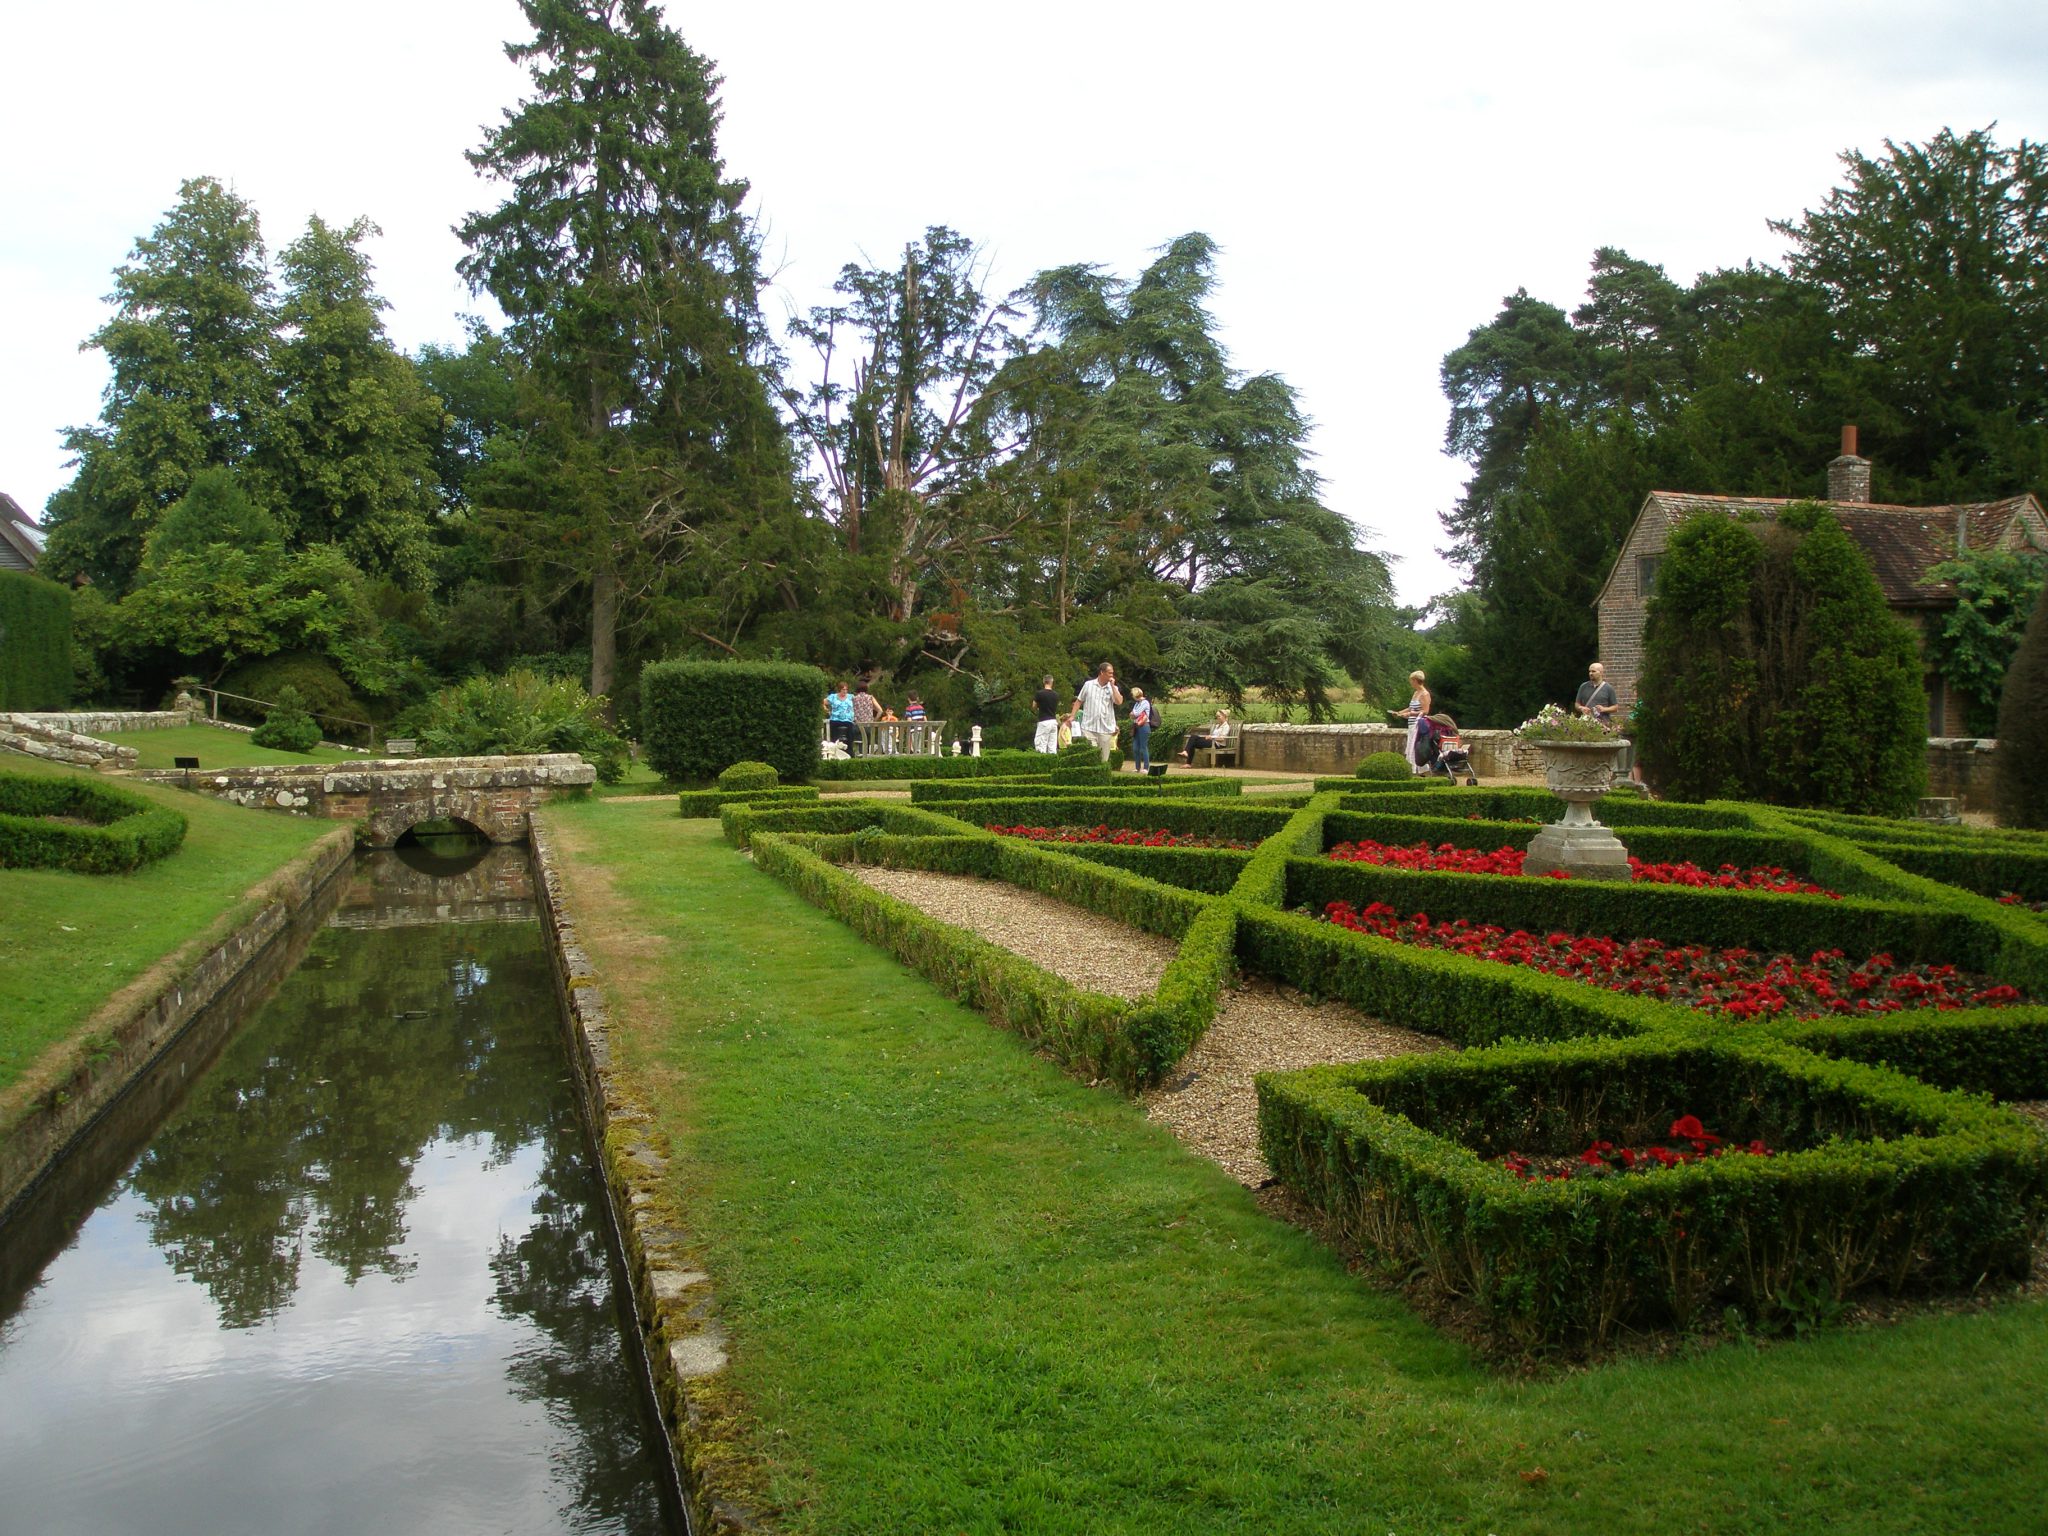 Another view of the Knot Garden